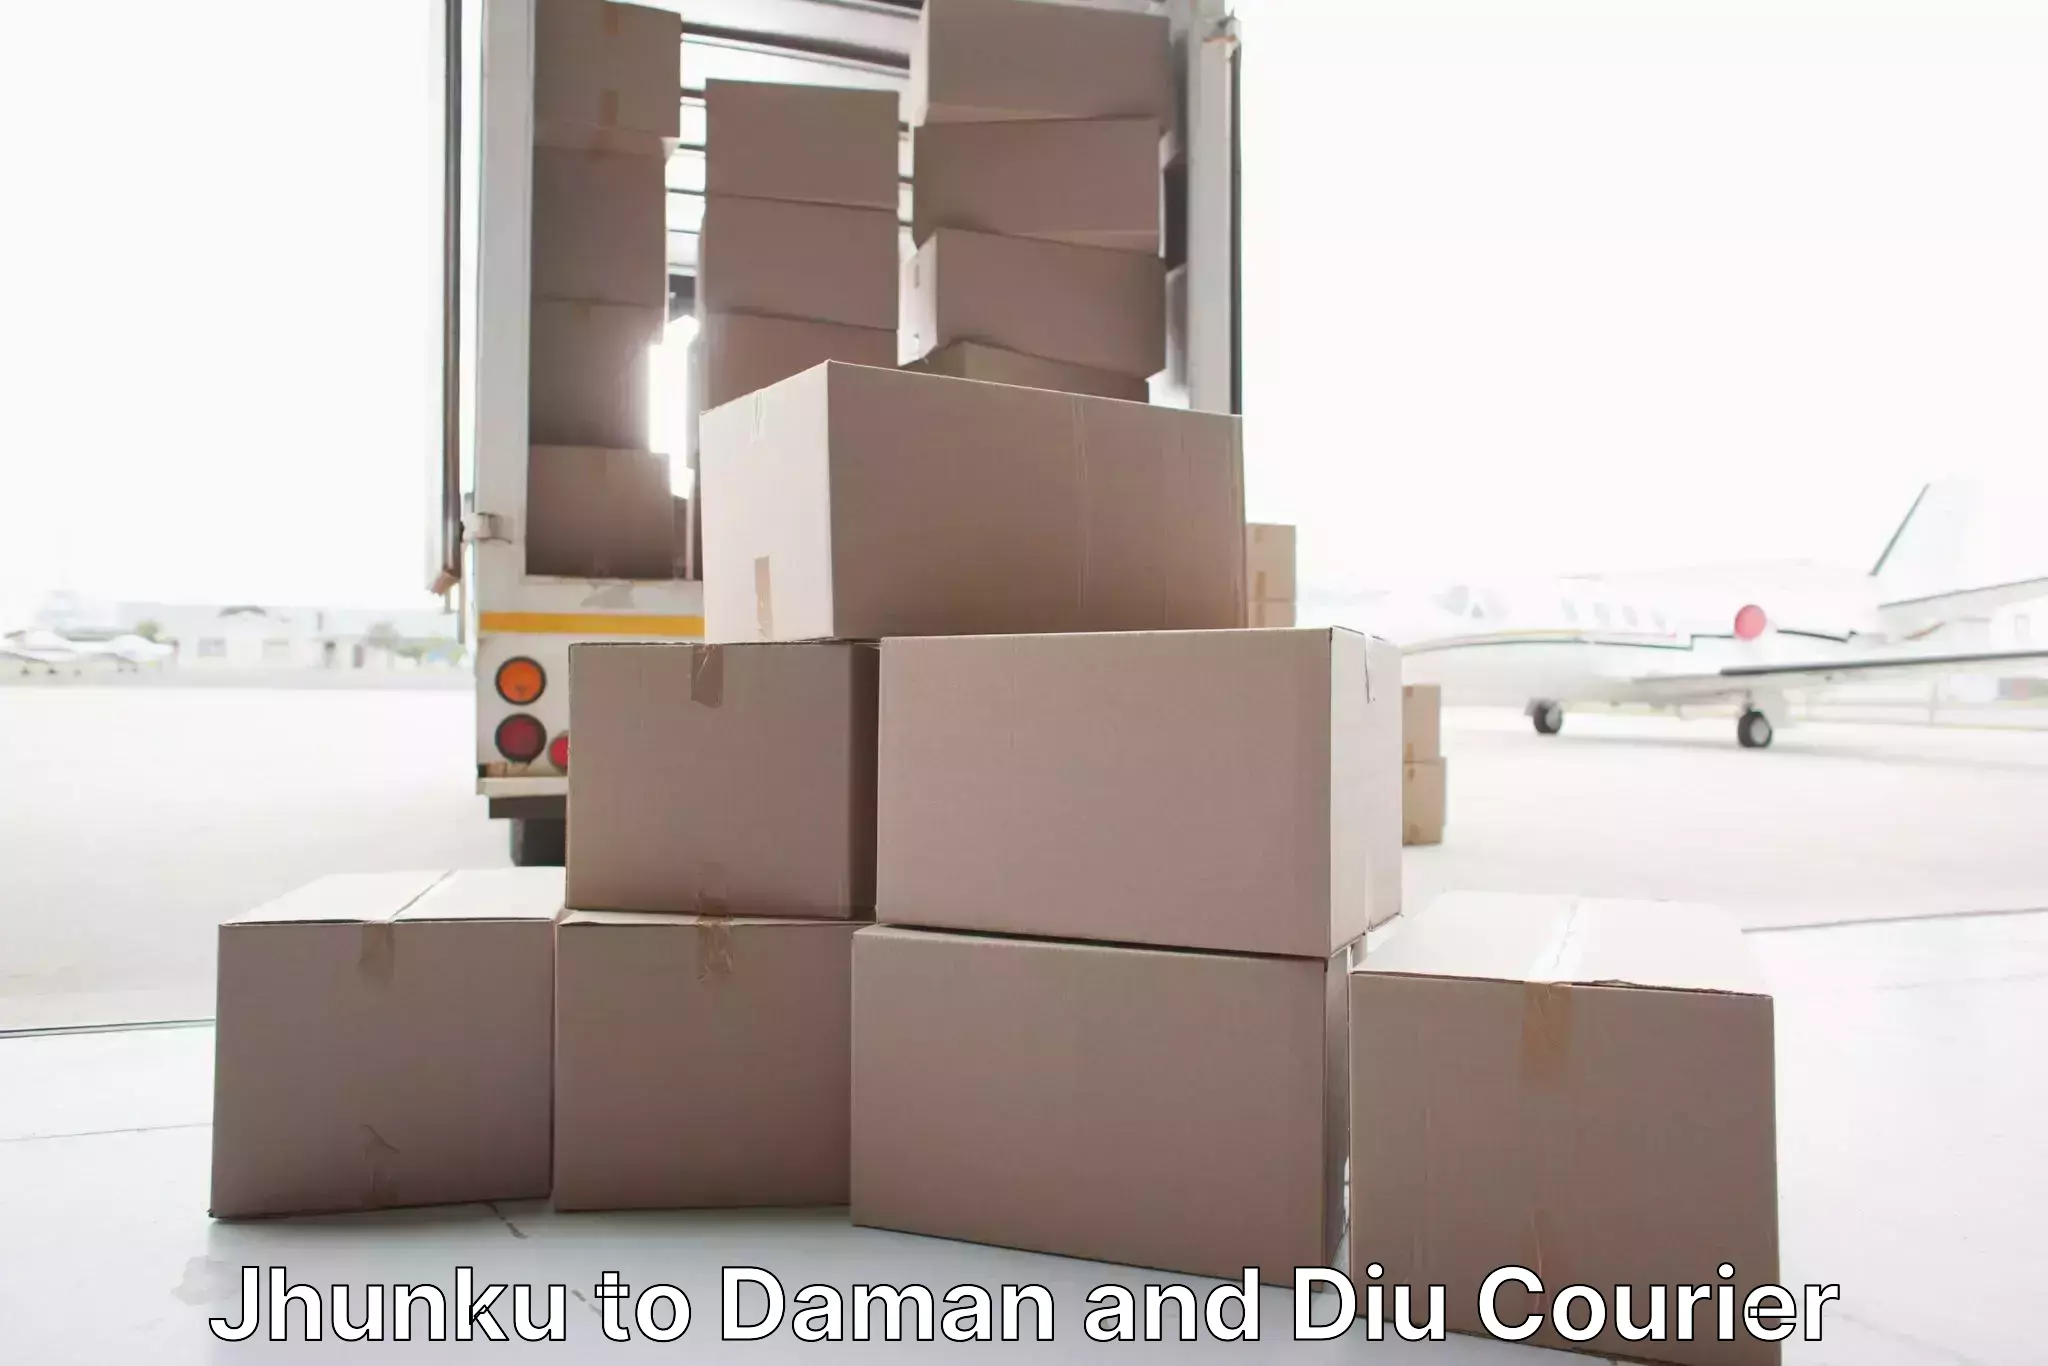 Specialized moving company Jhunku to Daman and Diu